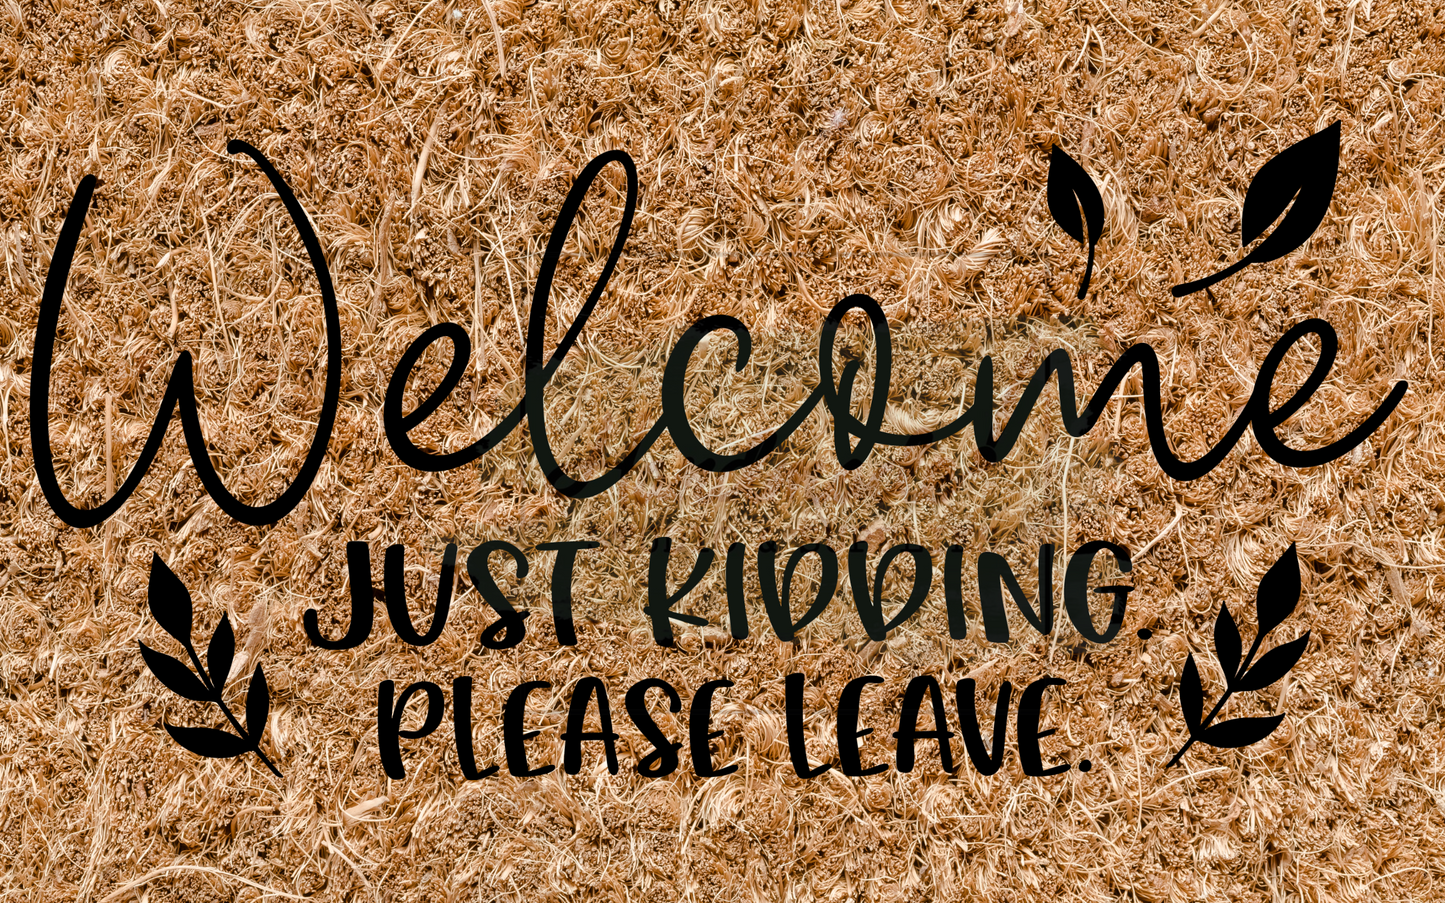 Welcome just kidding please leave - leaves